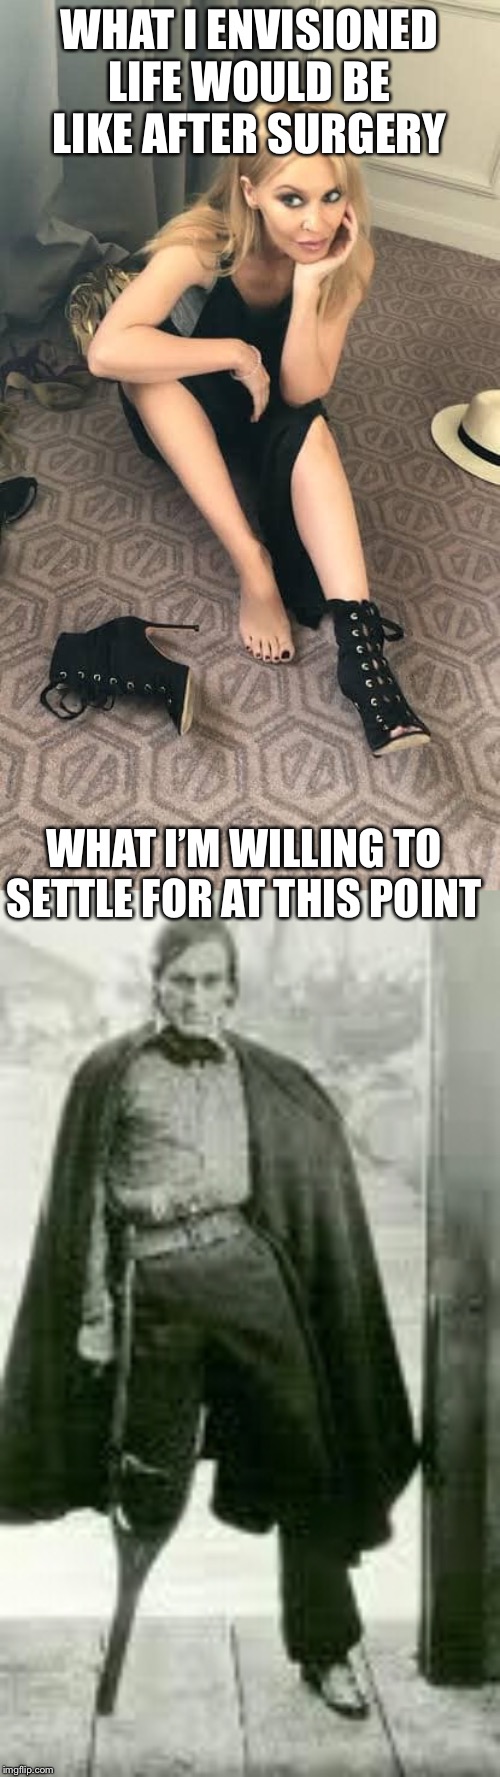 WHAT I ENVISIONED LIFE WOULD BE LIKE AFTER SURGERY; WHAT I’M WILLING TO SETTLE FOR AT THIS POINT | image tagged in captain ahab peg leg,kylie high-heel boots | made w/ Imgflip meme maker